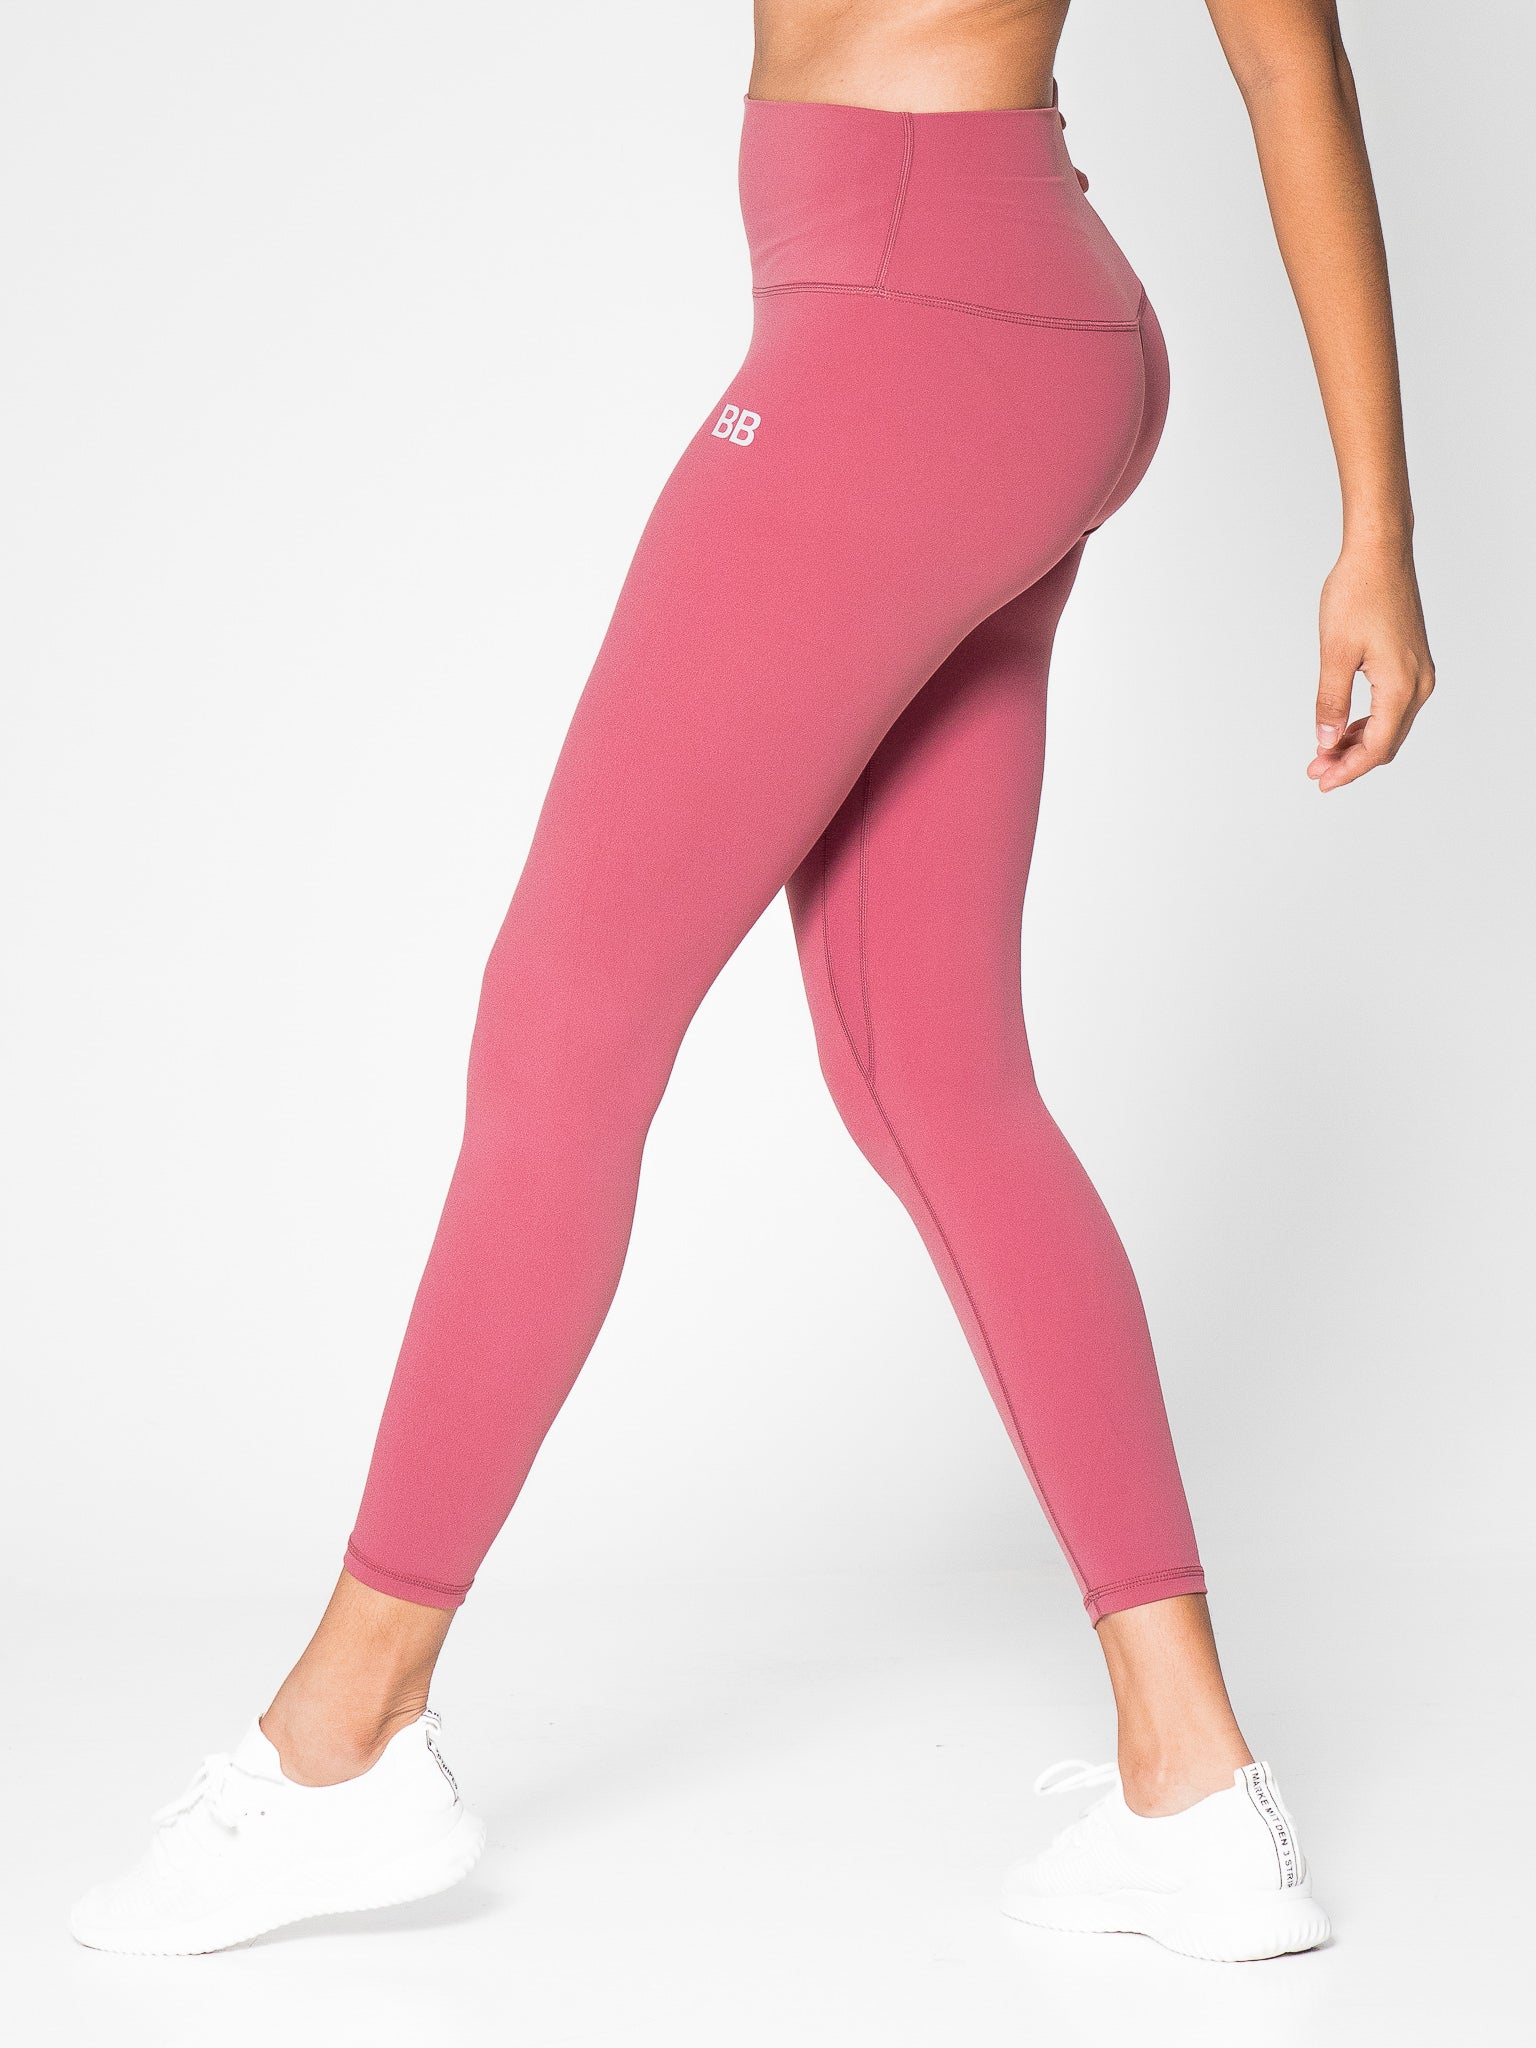 Spry Tights - Rosey